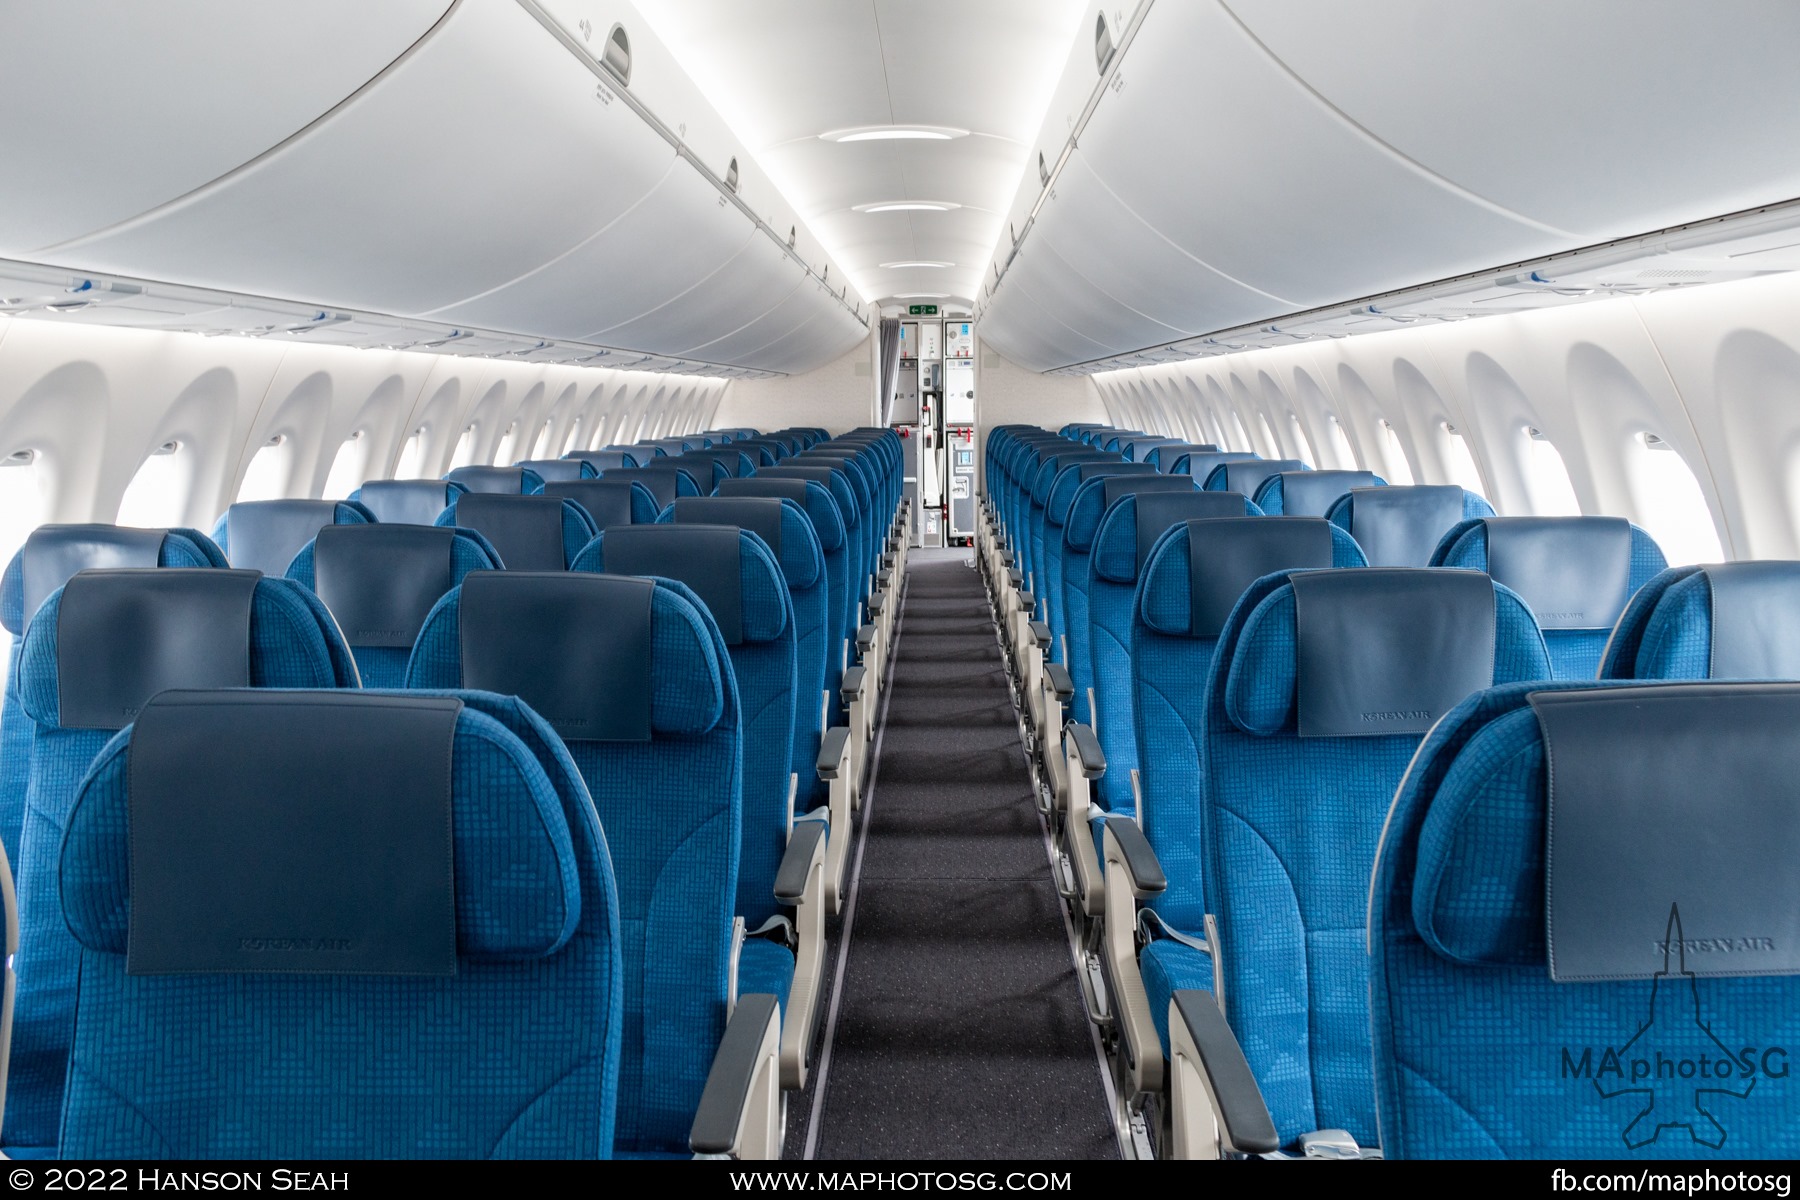 The Korean Air A220 features 140 seats in a 3+2 all economy layout